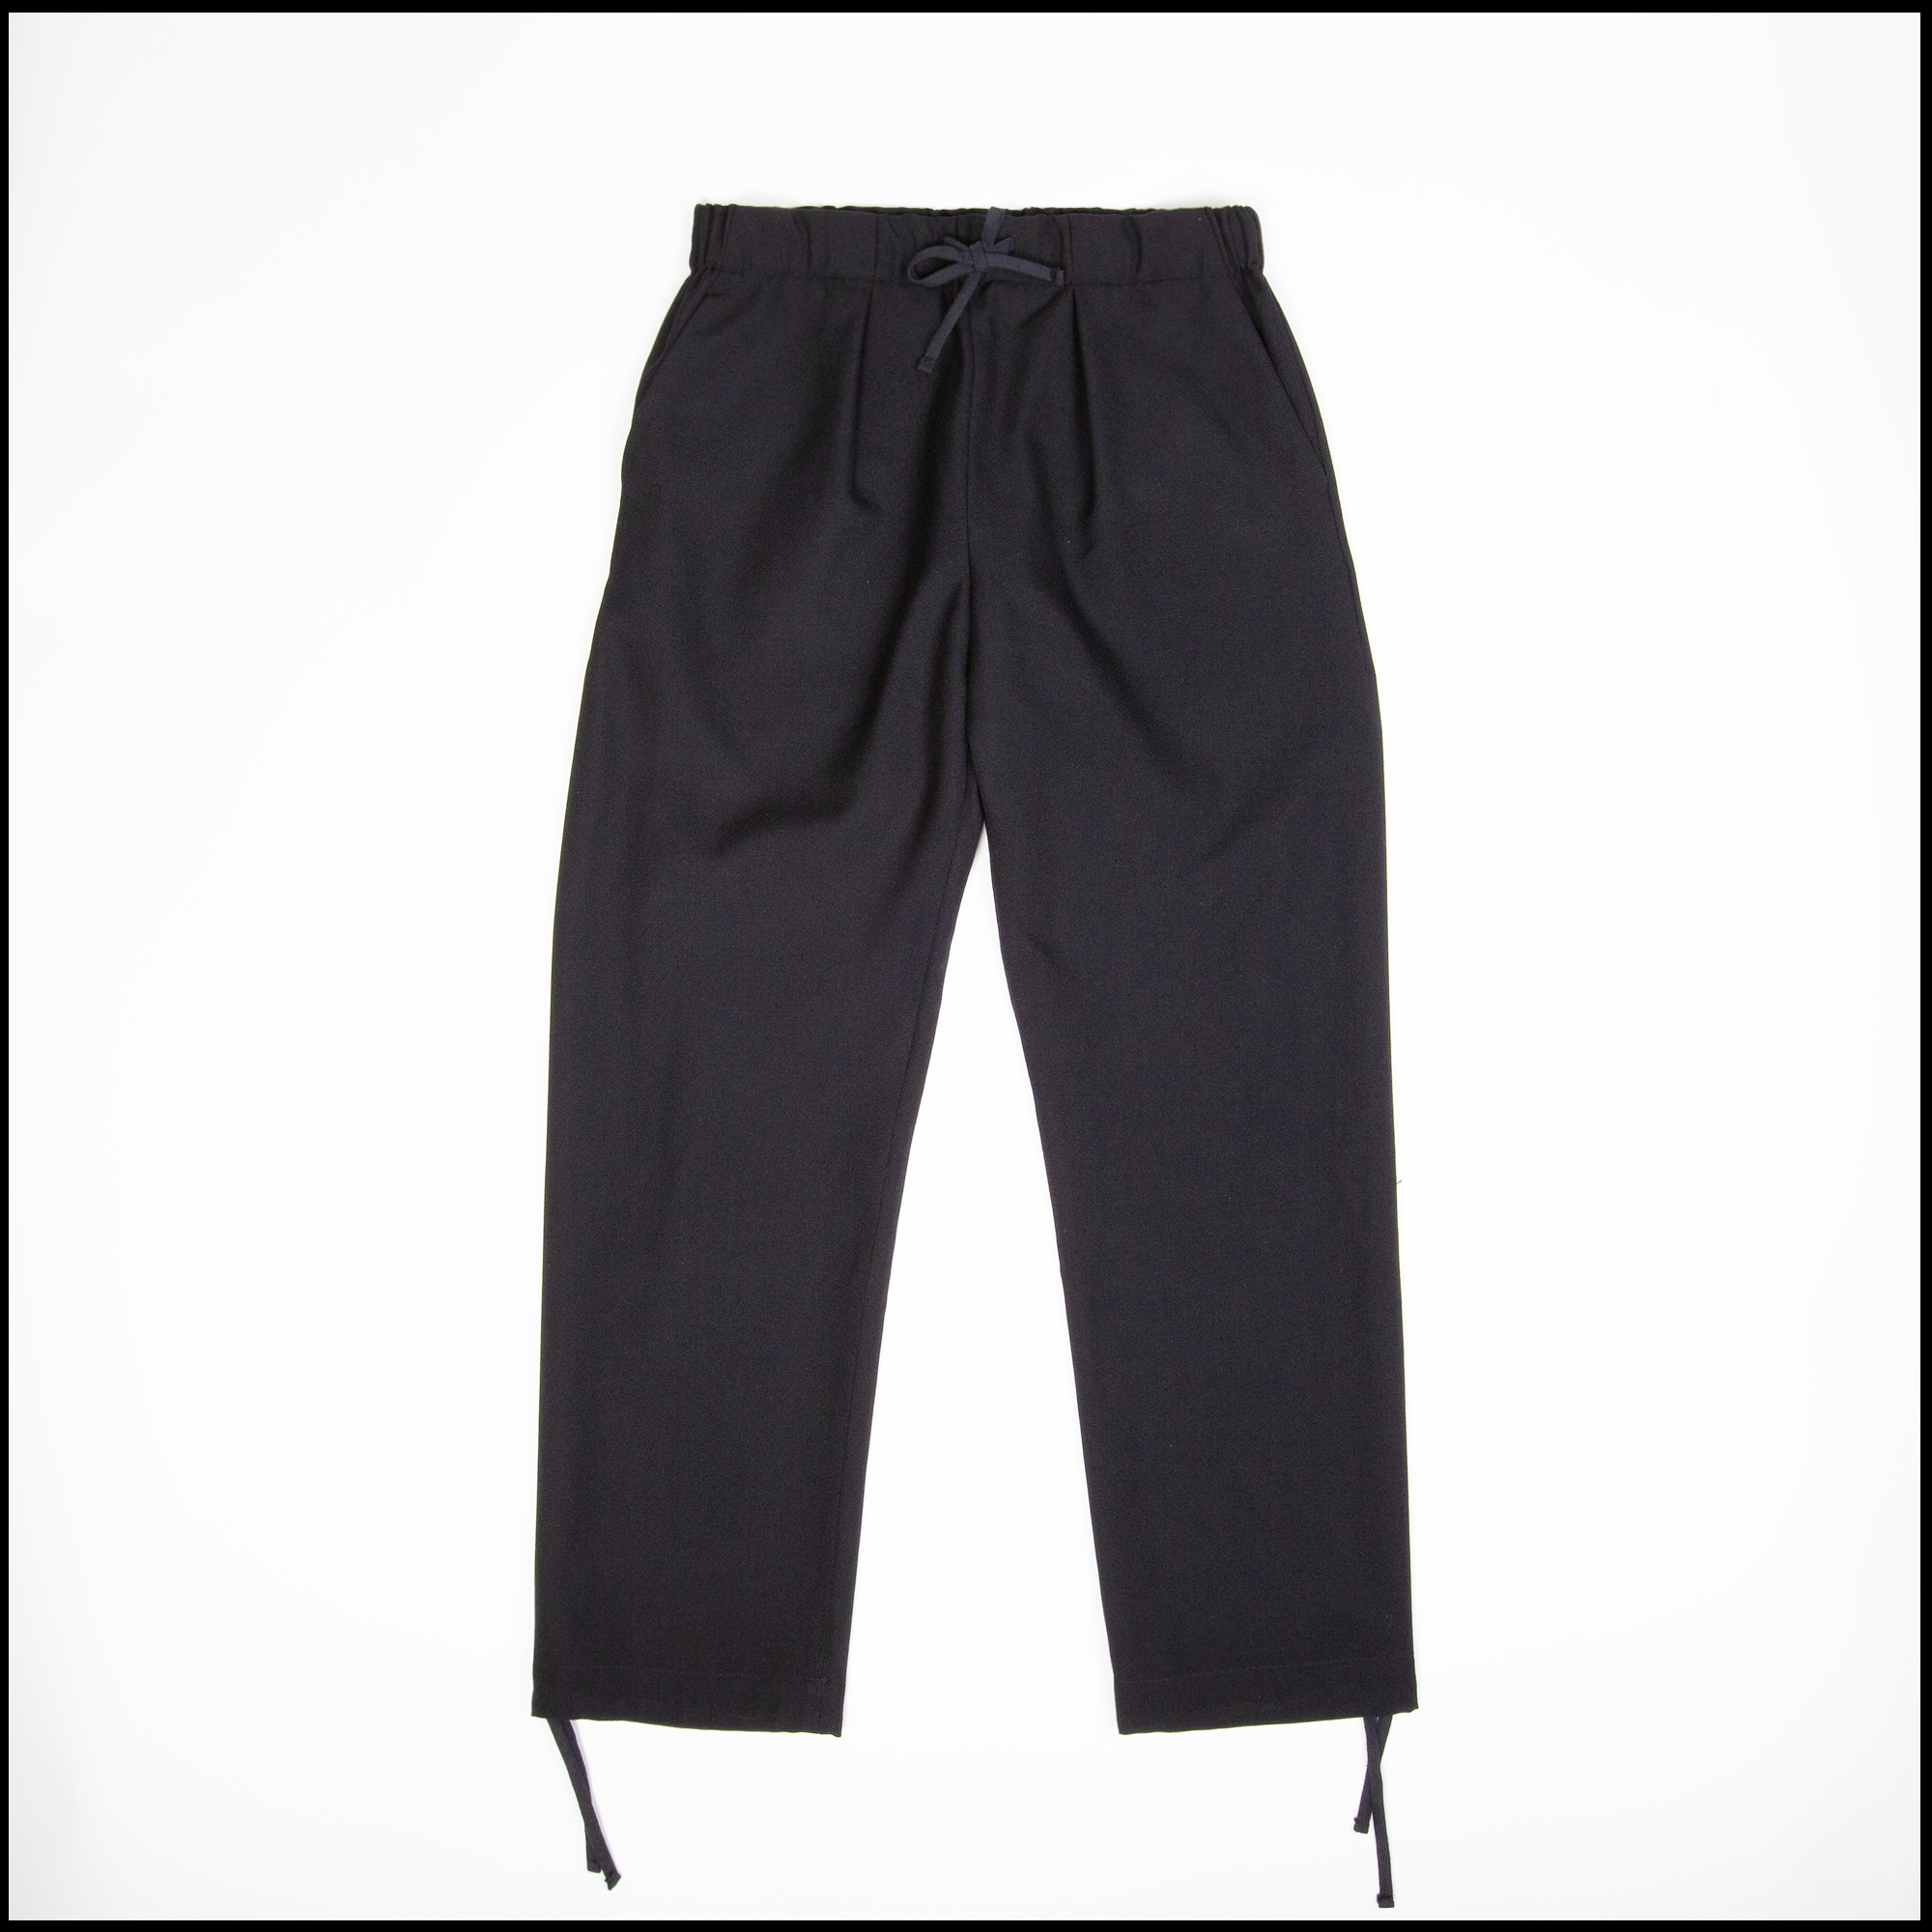 TERRA Pants in Midnight blue color by Arpenteur